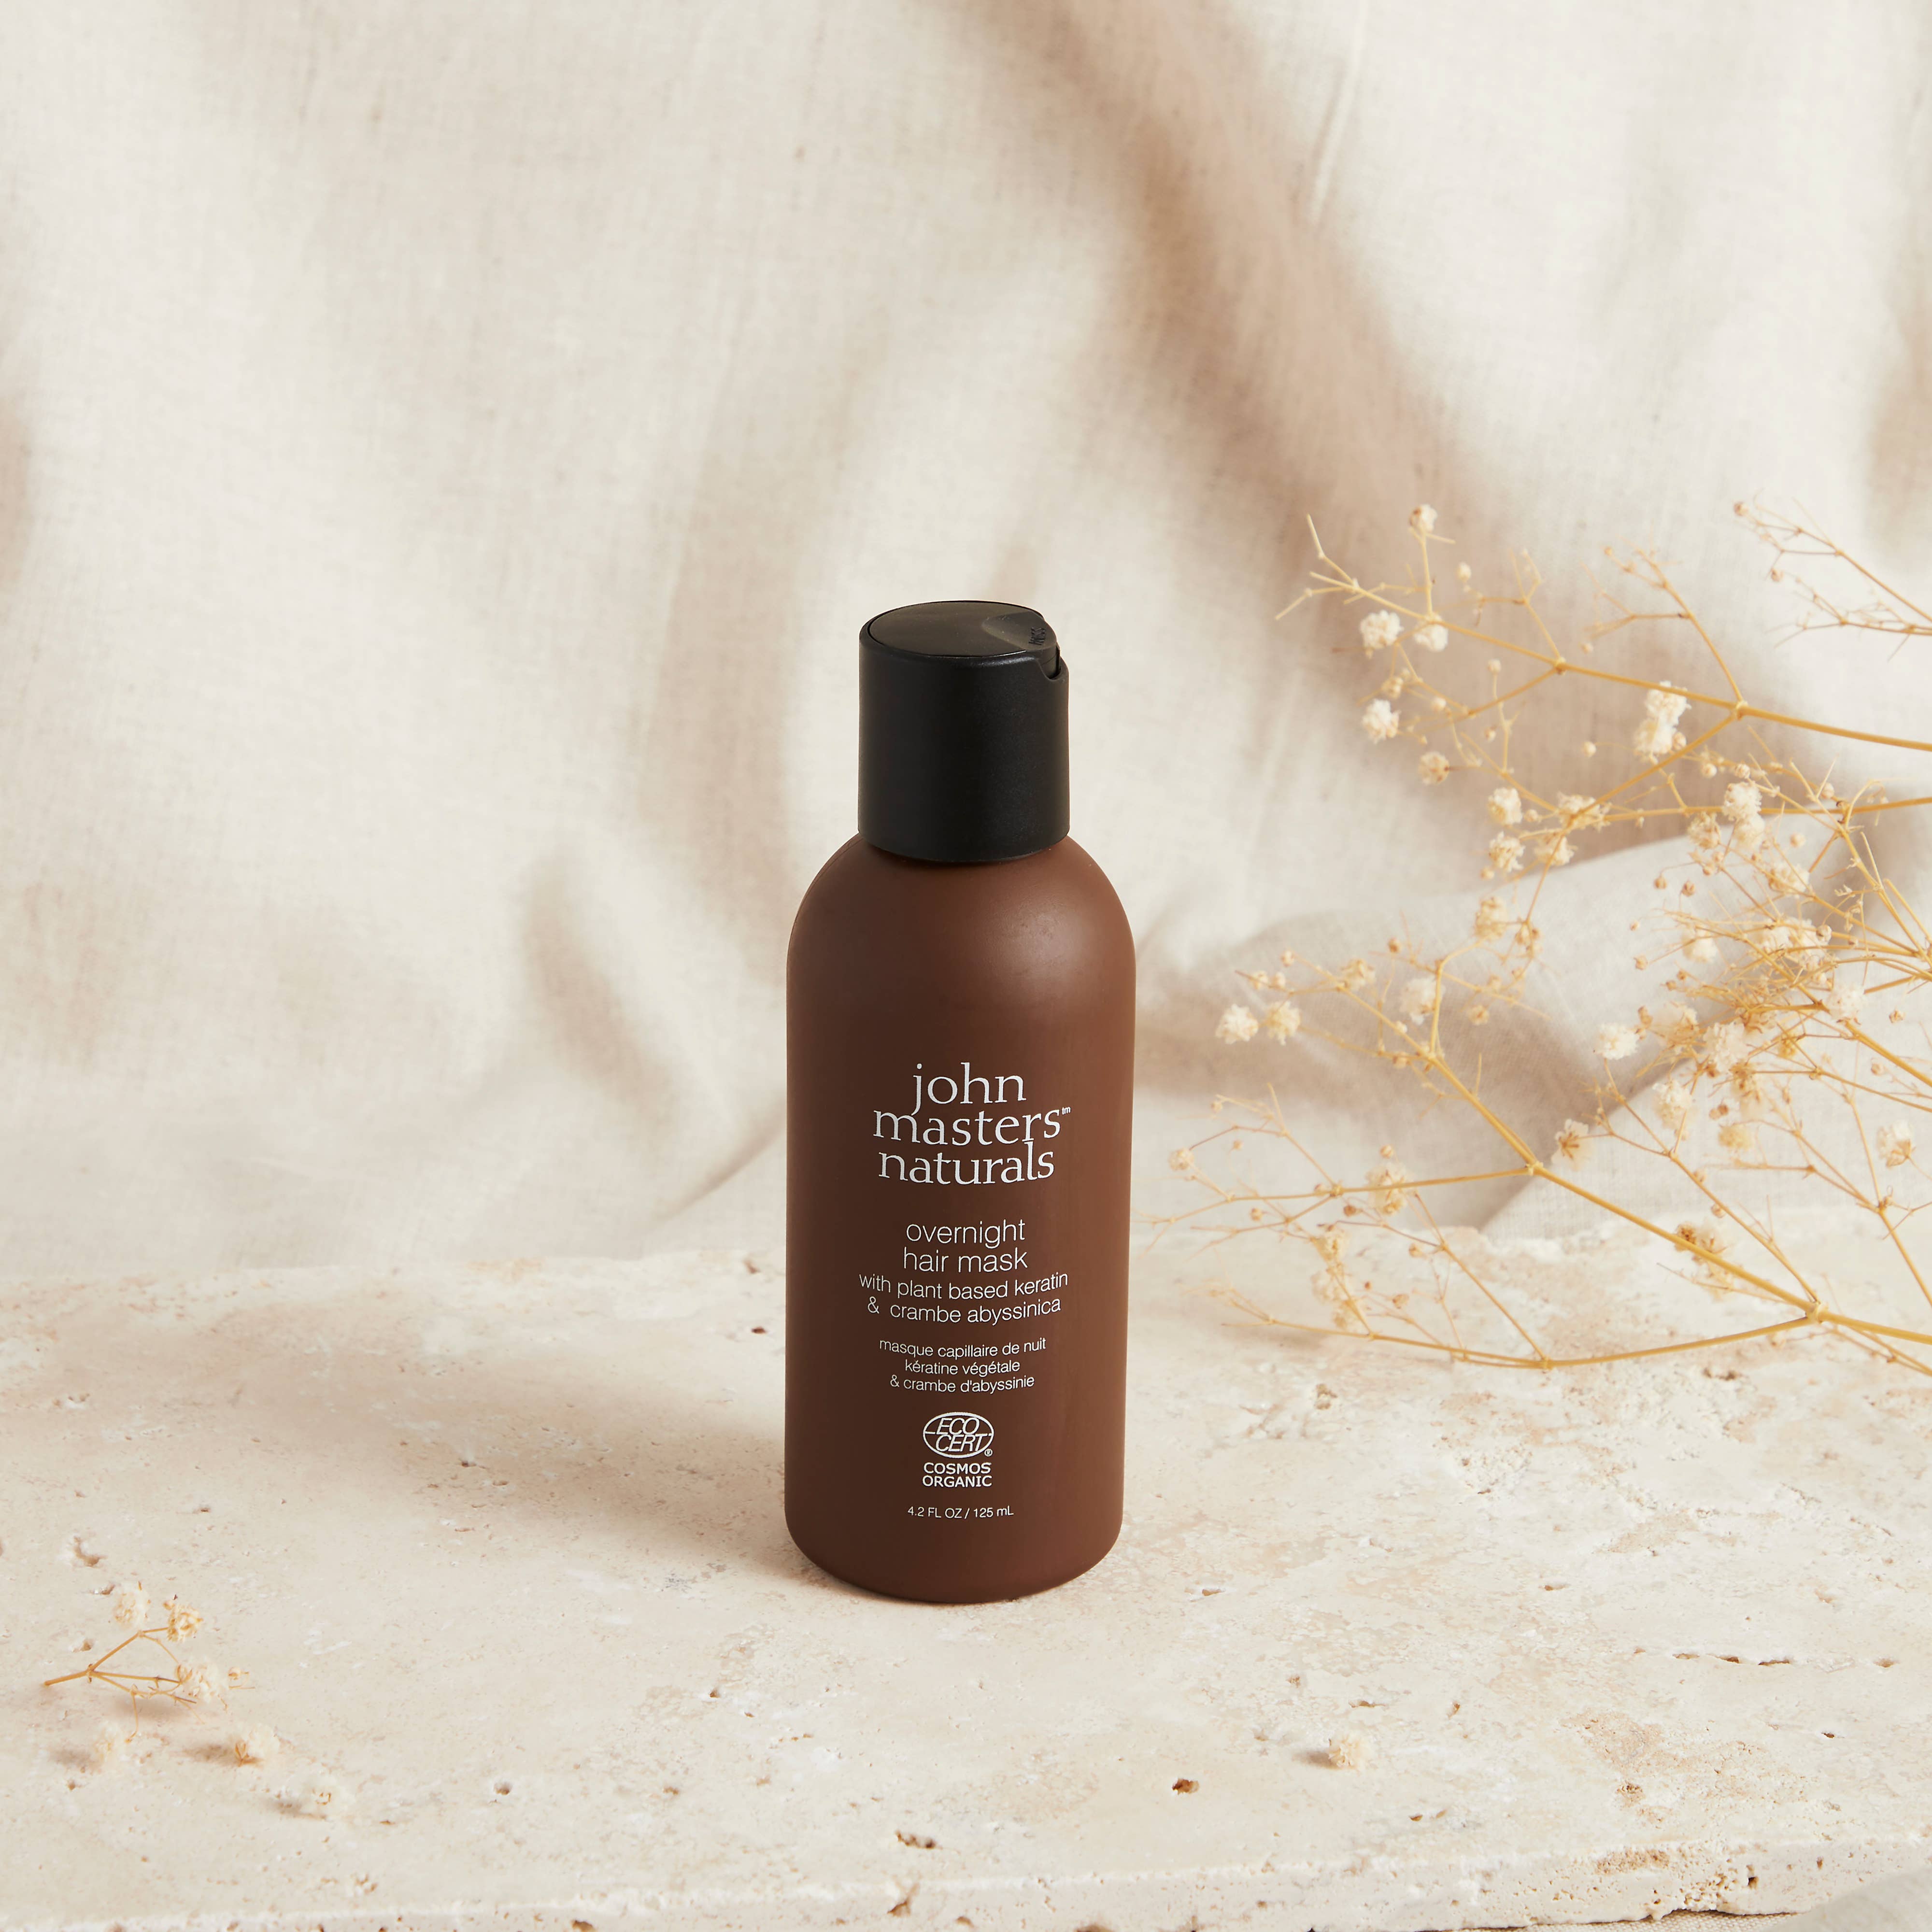 Overnight Hair Mask with Plant Based Keratin & Crambe Abyssi: 4.2 fl oz.